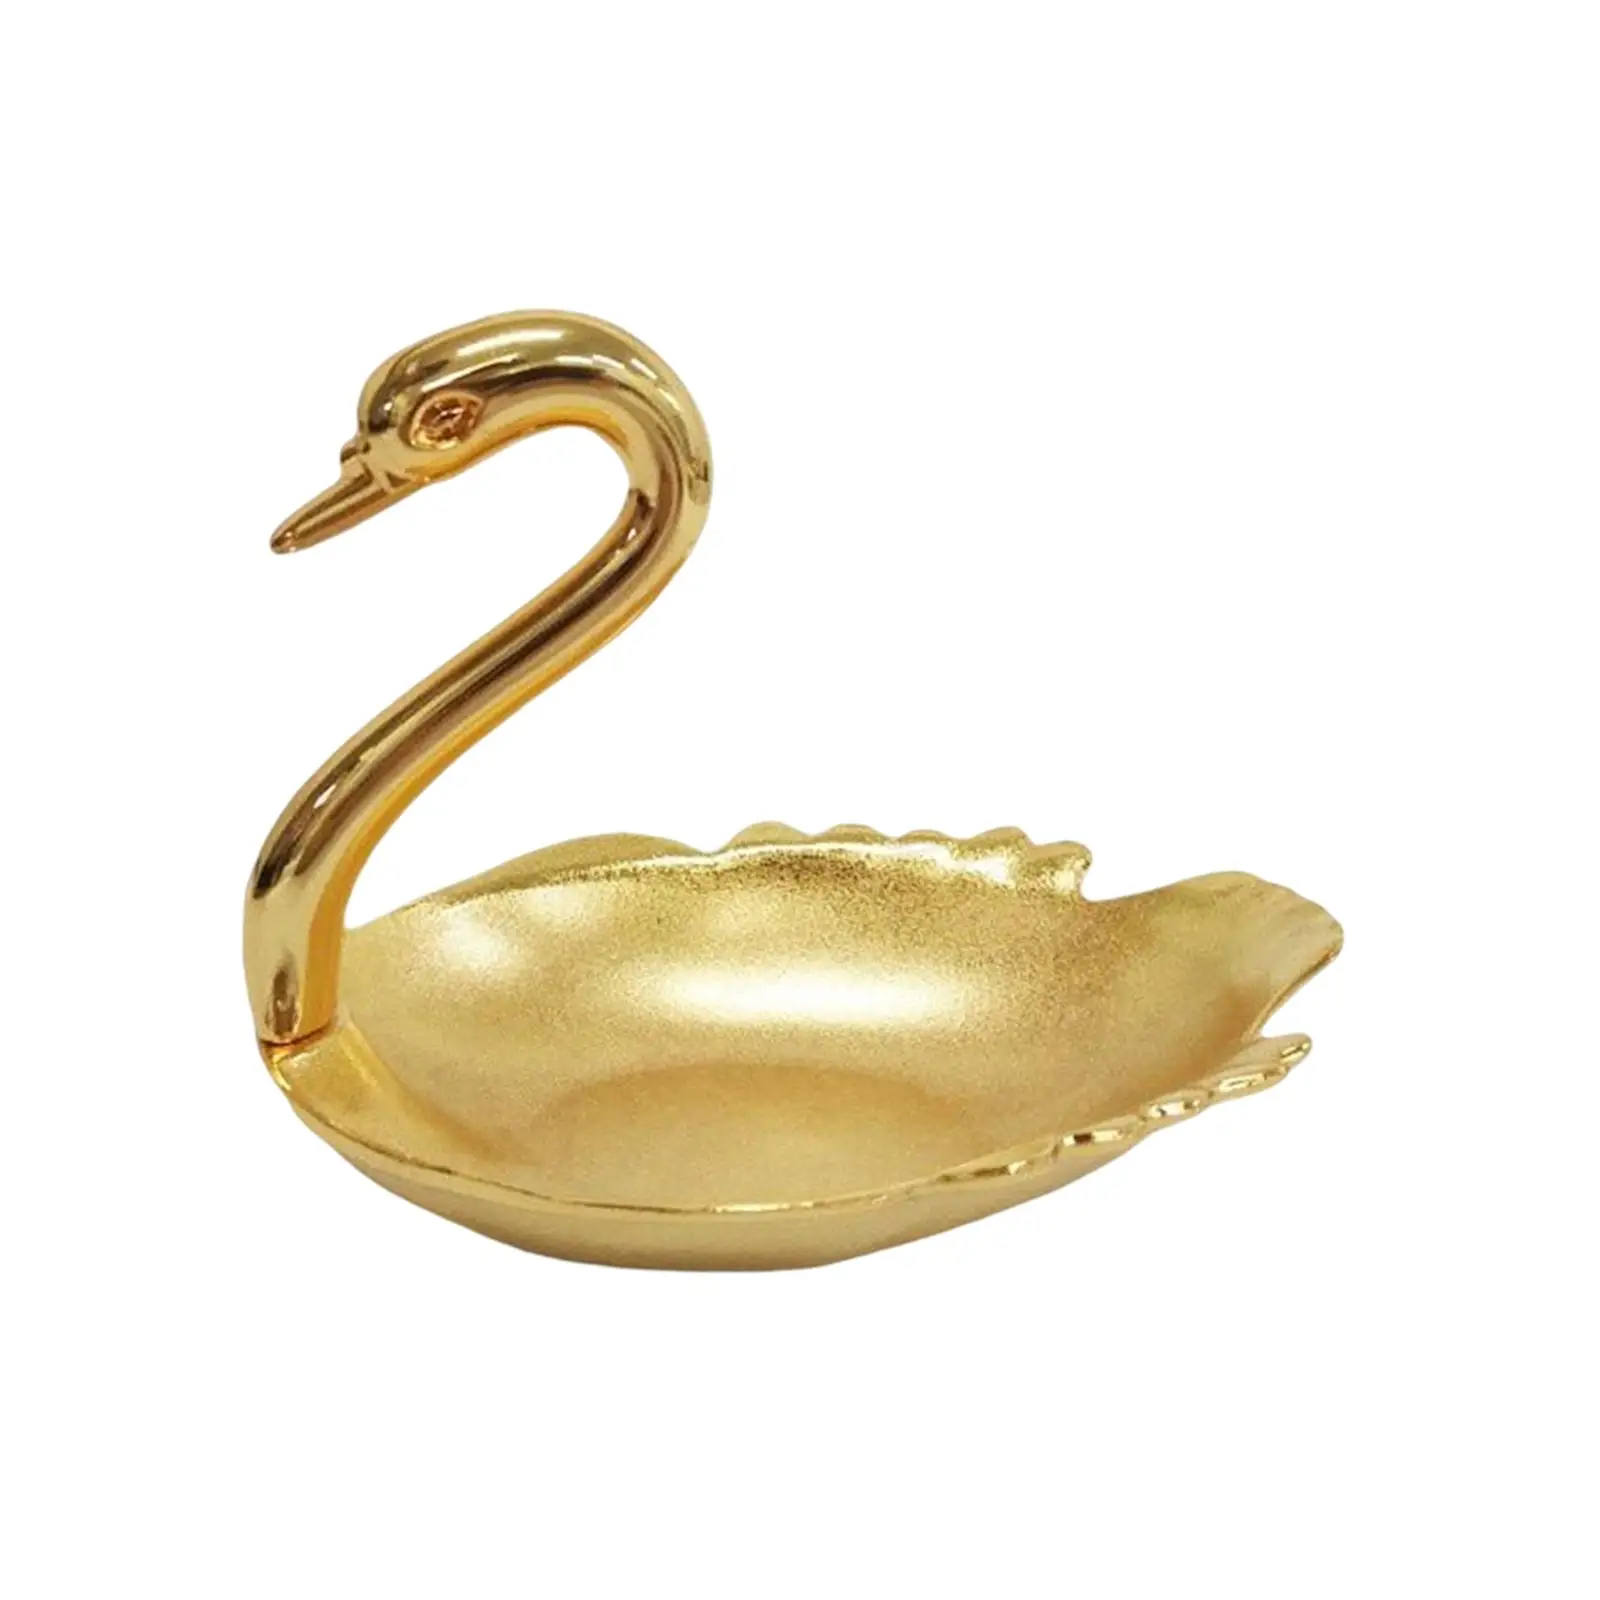 Metal Swan Shape Fruits Serving Tray Cookie Storage Bowl Candy Dish Dessert Platter for Table Desk Bar Buffet Decoration